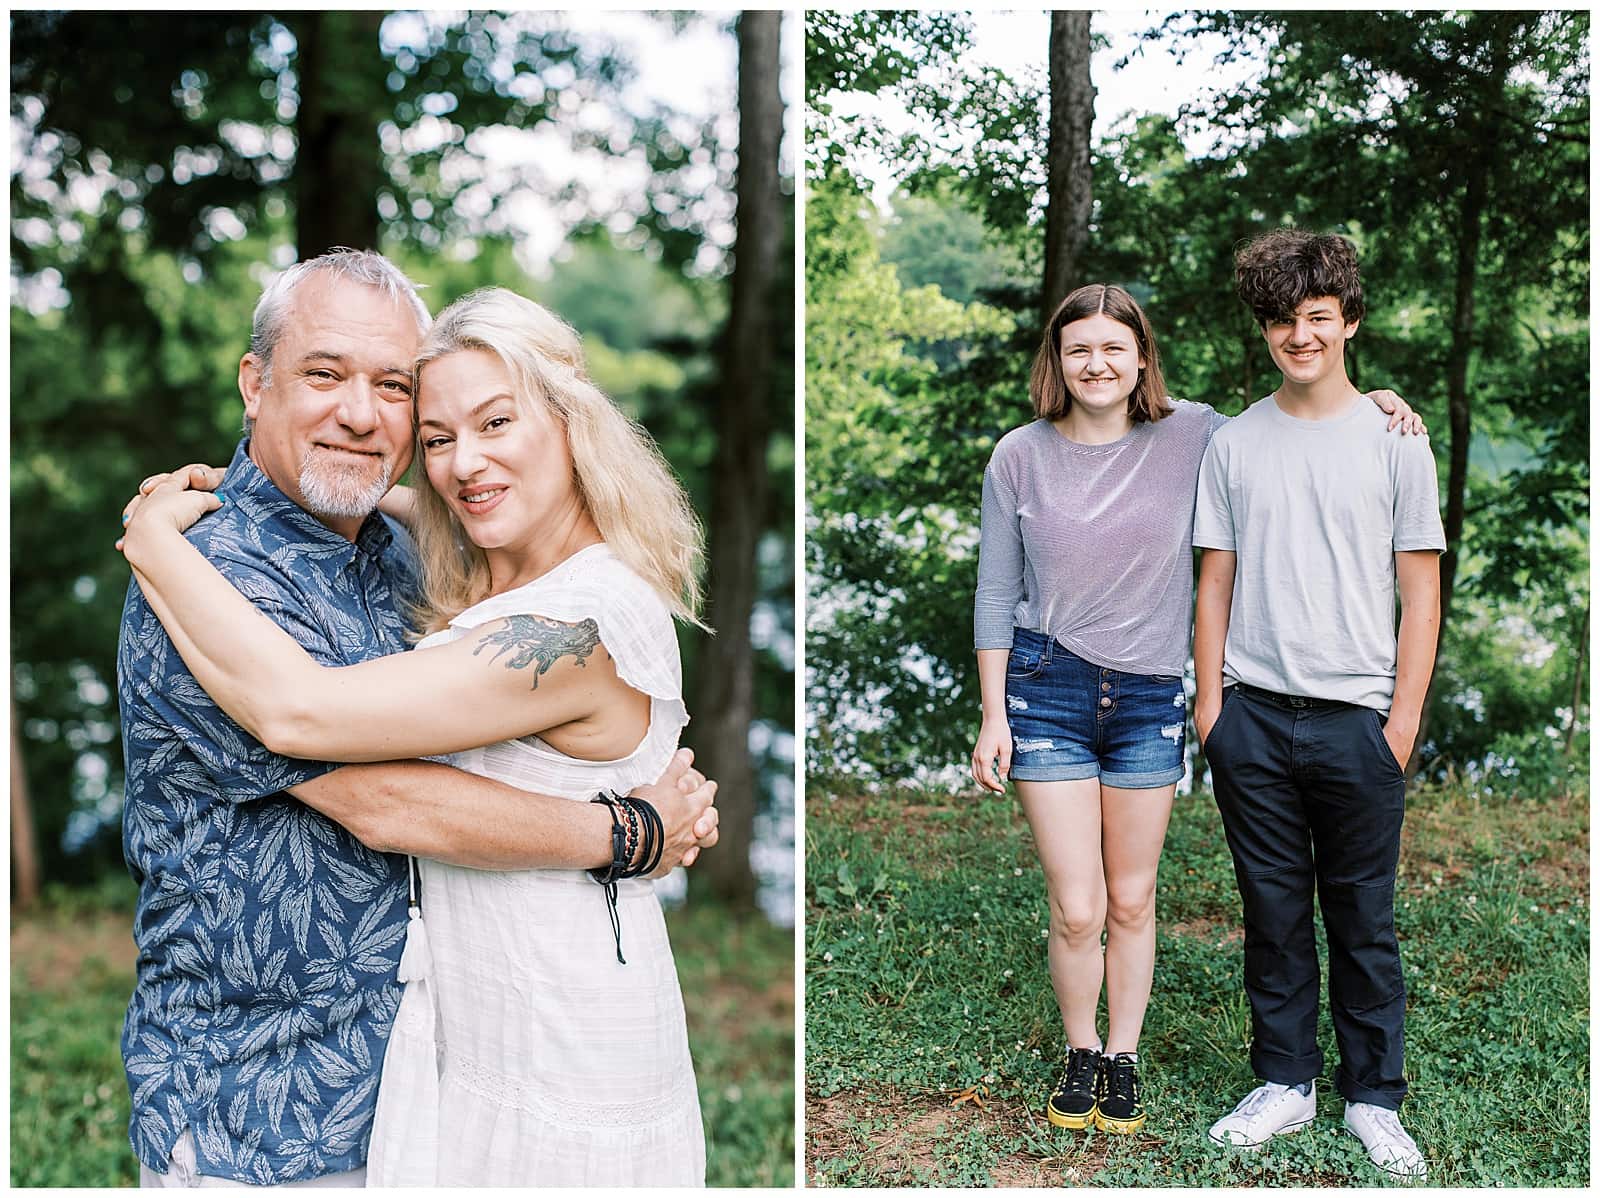 Danielle-Defayette-Photography-Knoxville-Family-Photographer-TN_0003.jpg